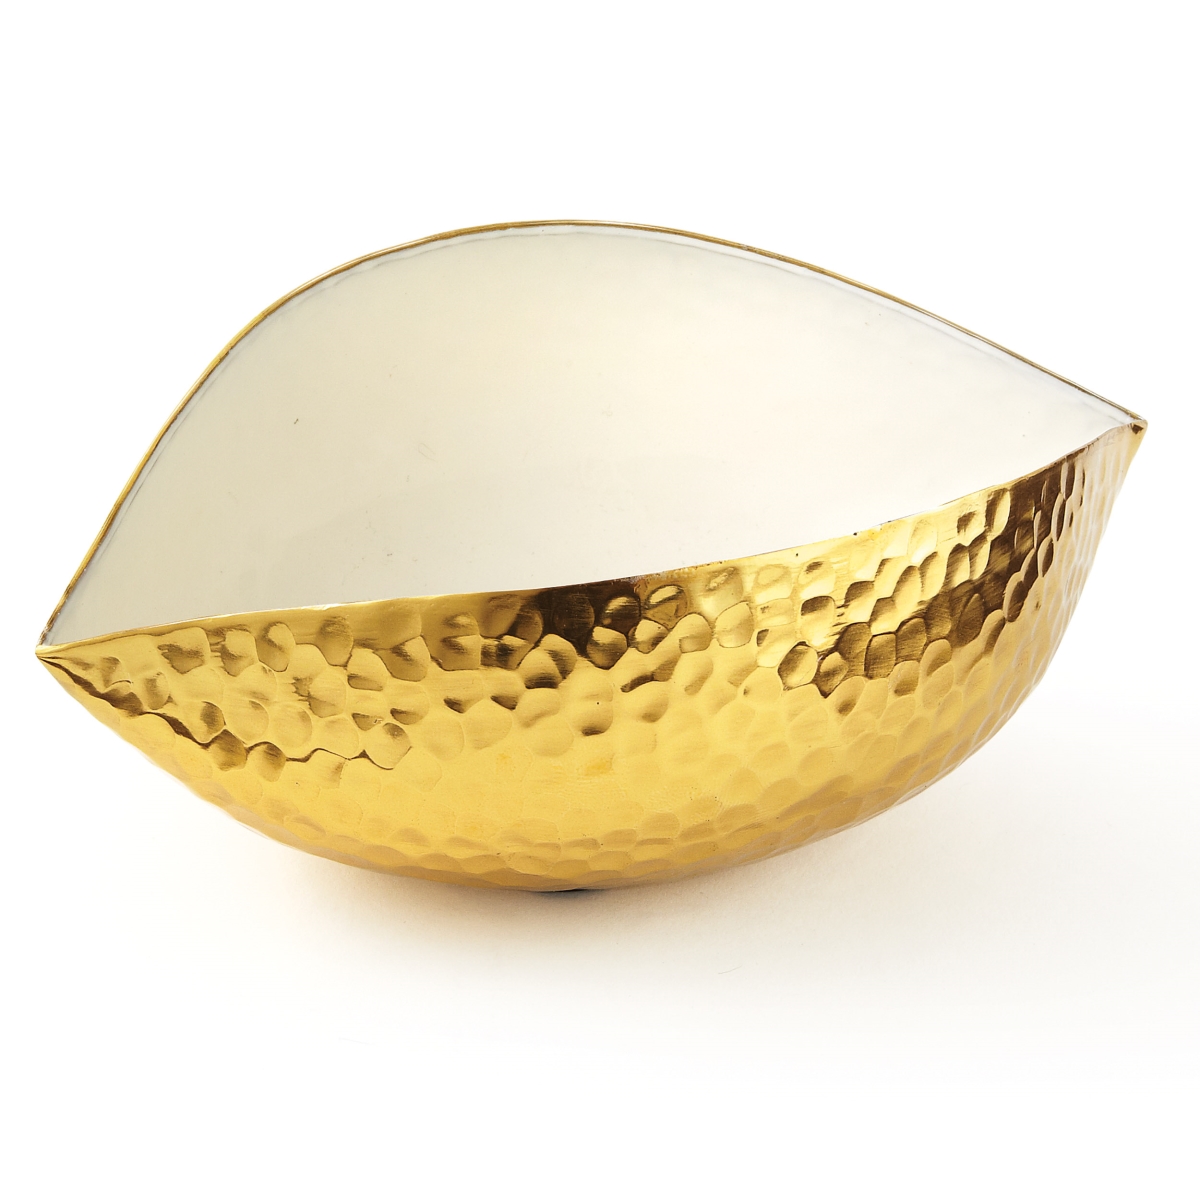 70181 6.75 X 4 X 2.75 In. Bethany Bowl, Gold & White